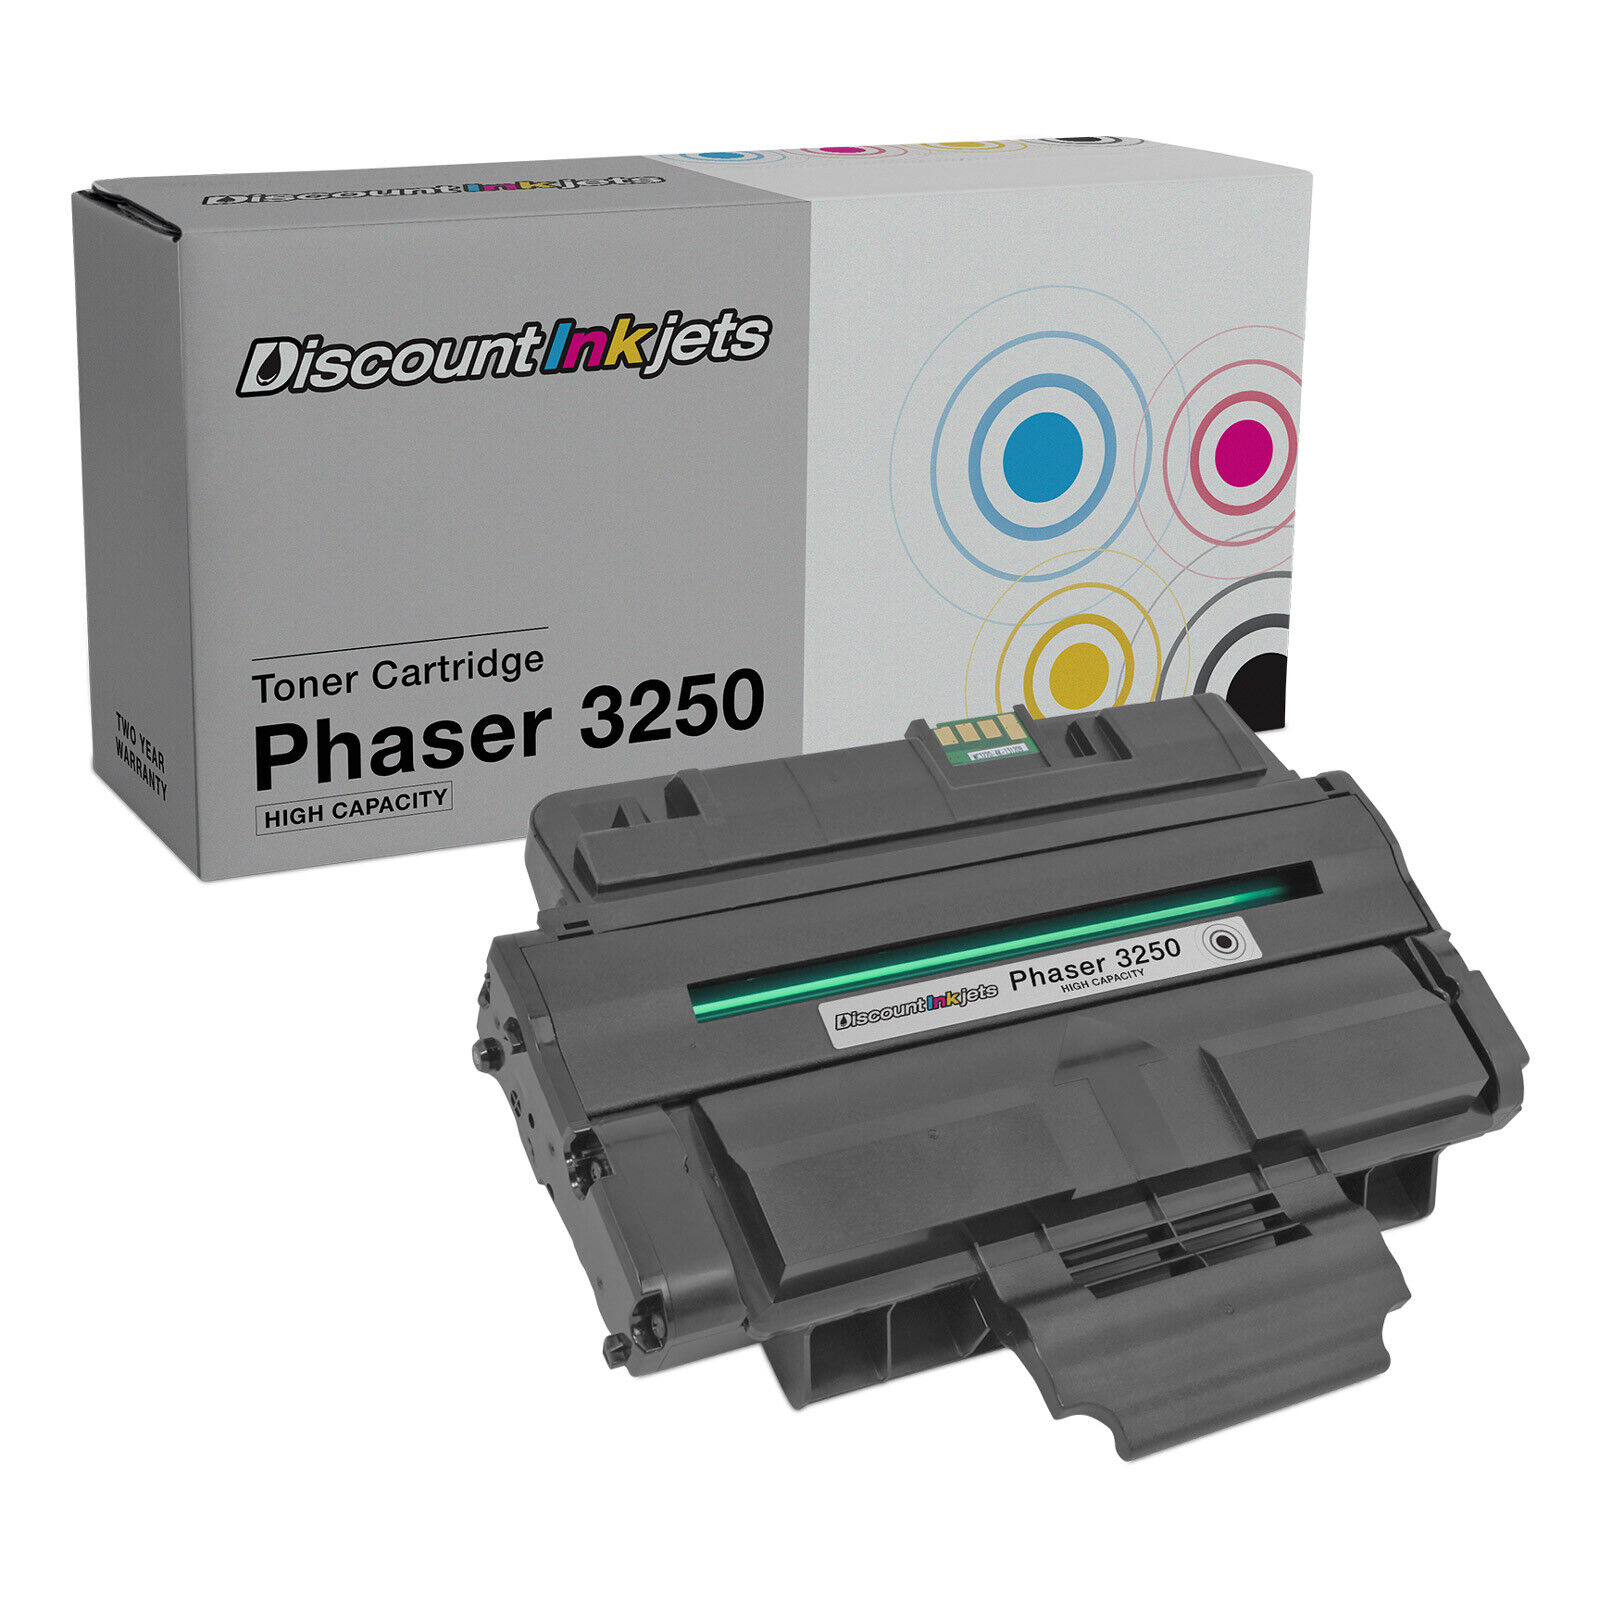 Ink Cartridges Replacements for Xerox Phaser 3250 106R1374 1pk HY